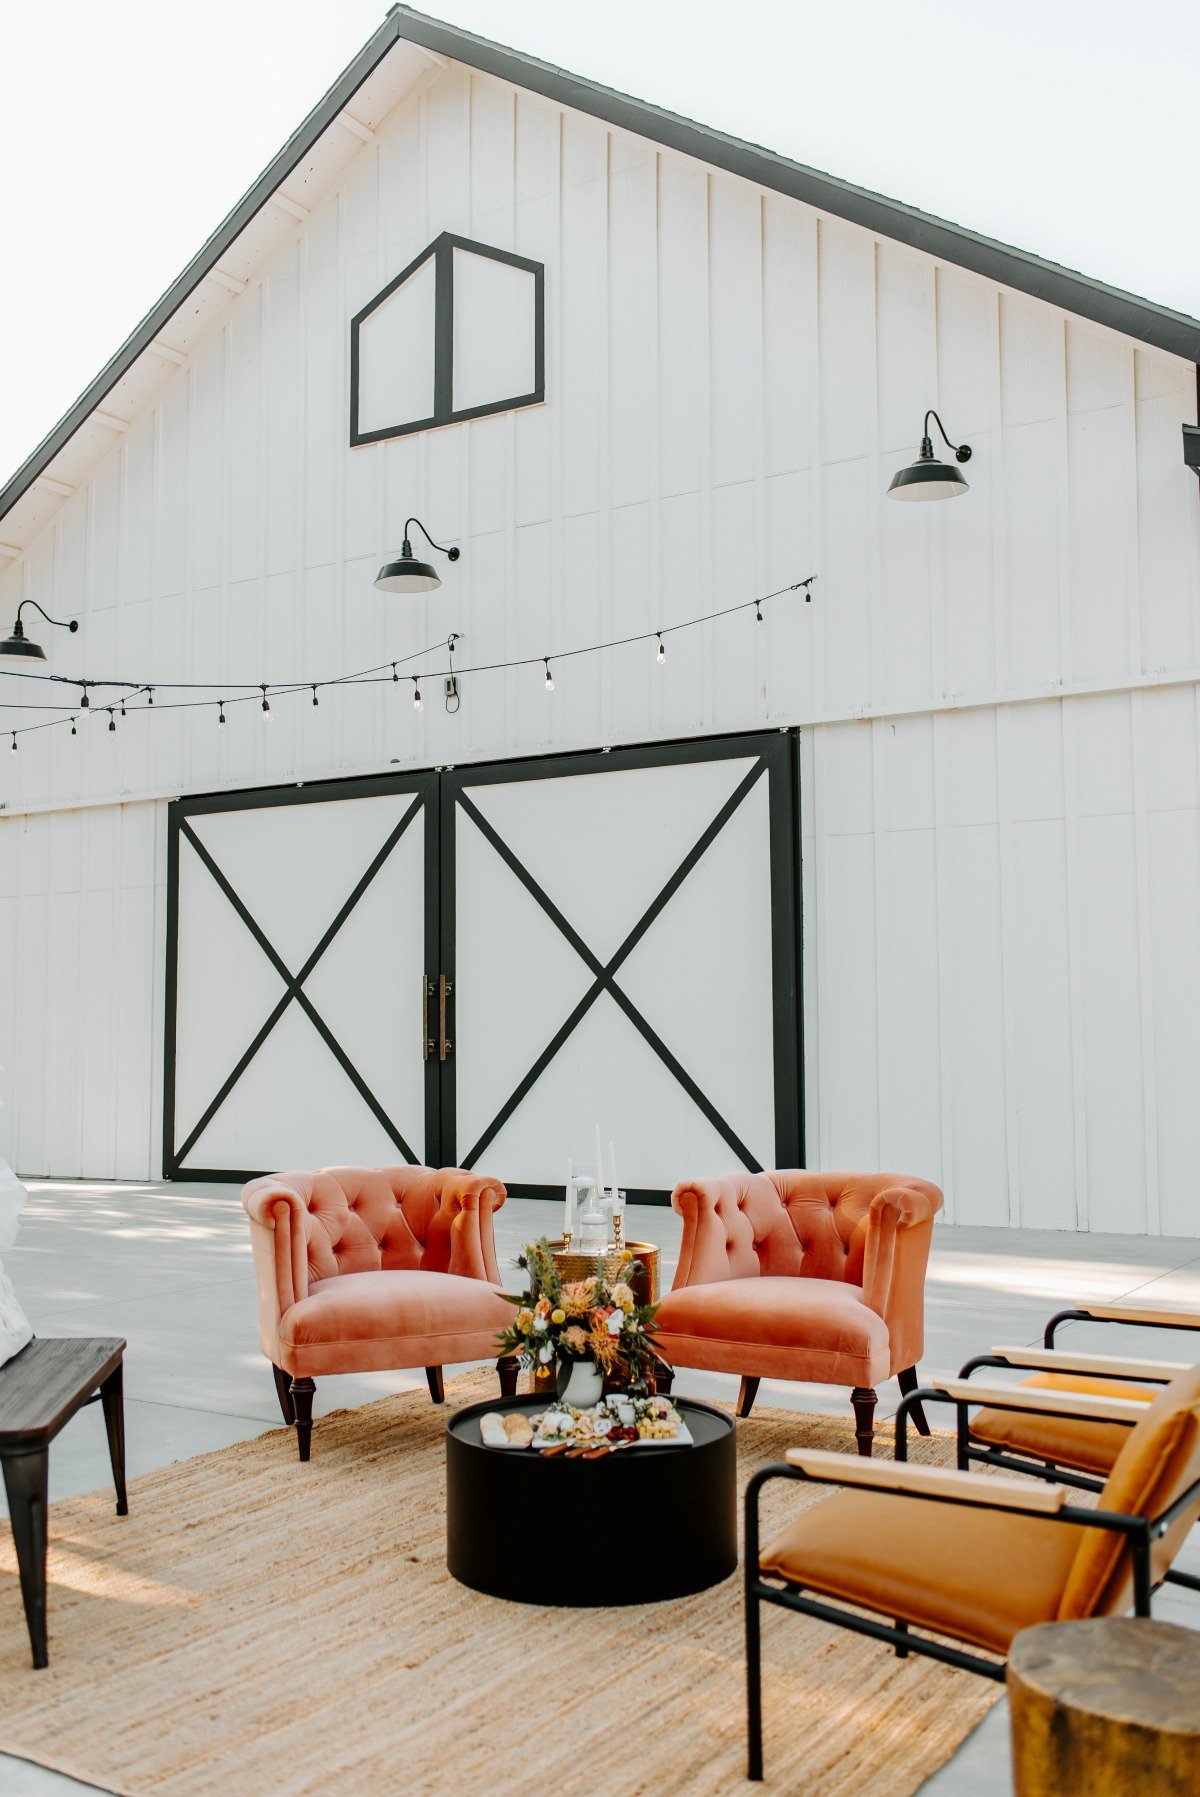 This Inspiration Shoot Is The Barn-Wedding Equivalent Of Glamping